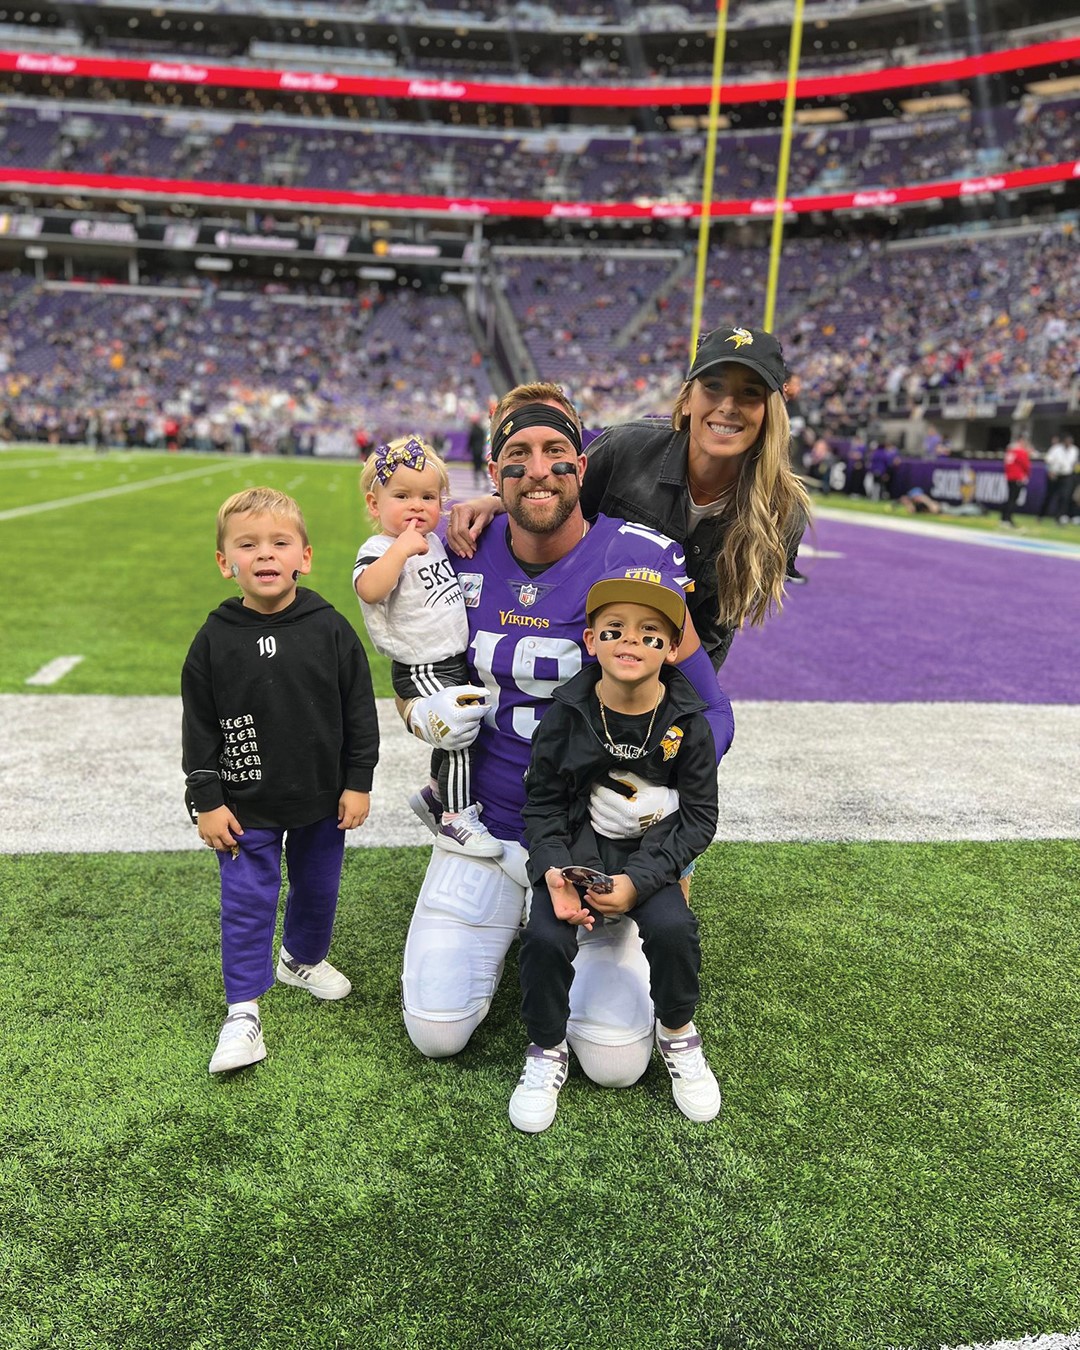 Caitlin Thielen and her children, Hudson, Cora and Asher, support husband and father Adam Thielen on the field.